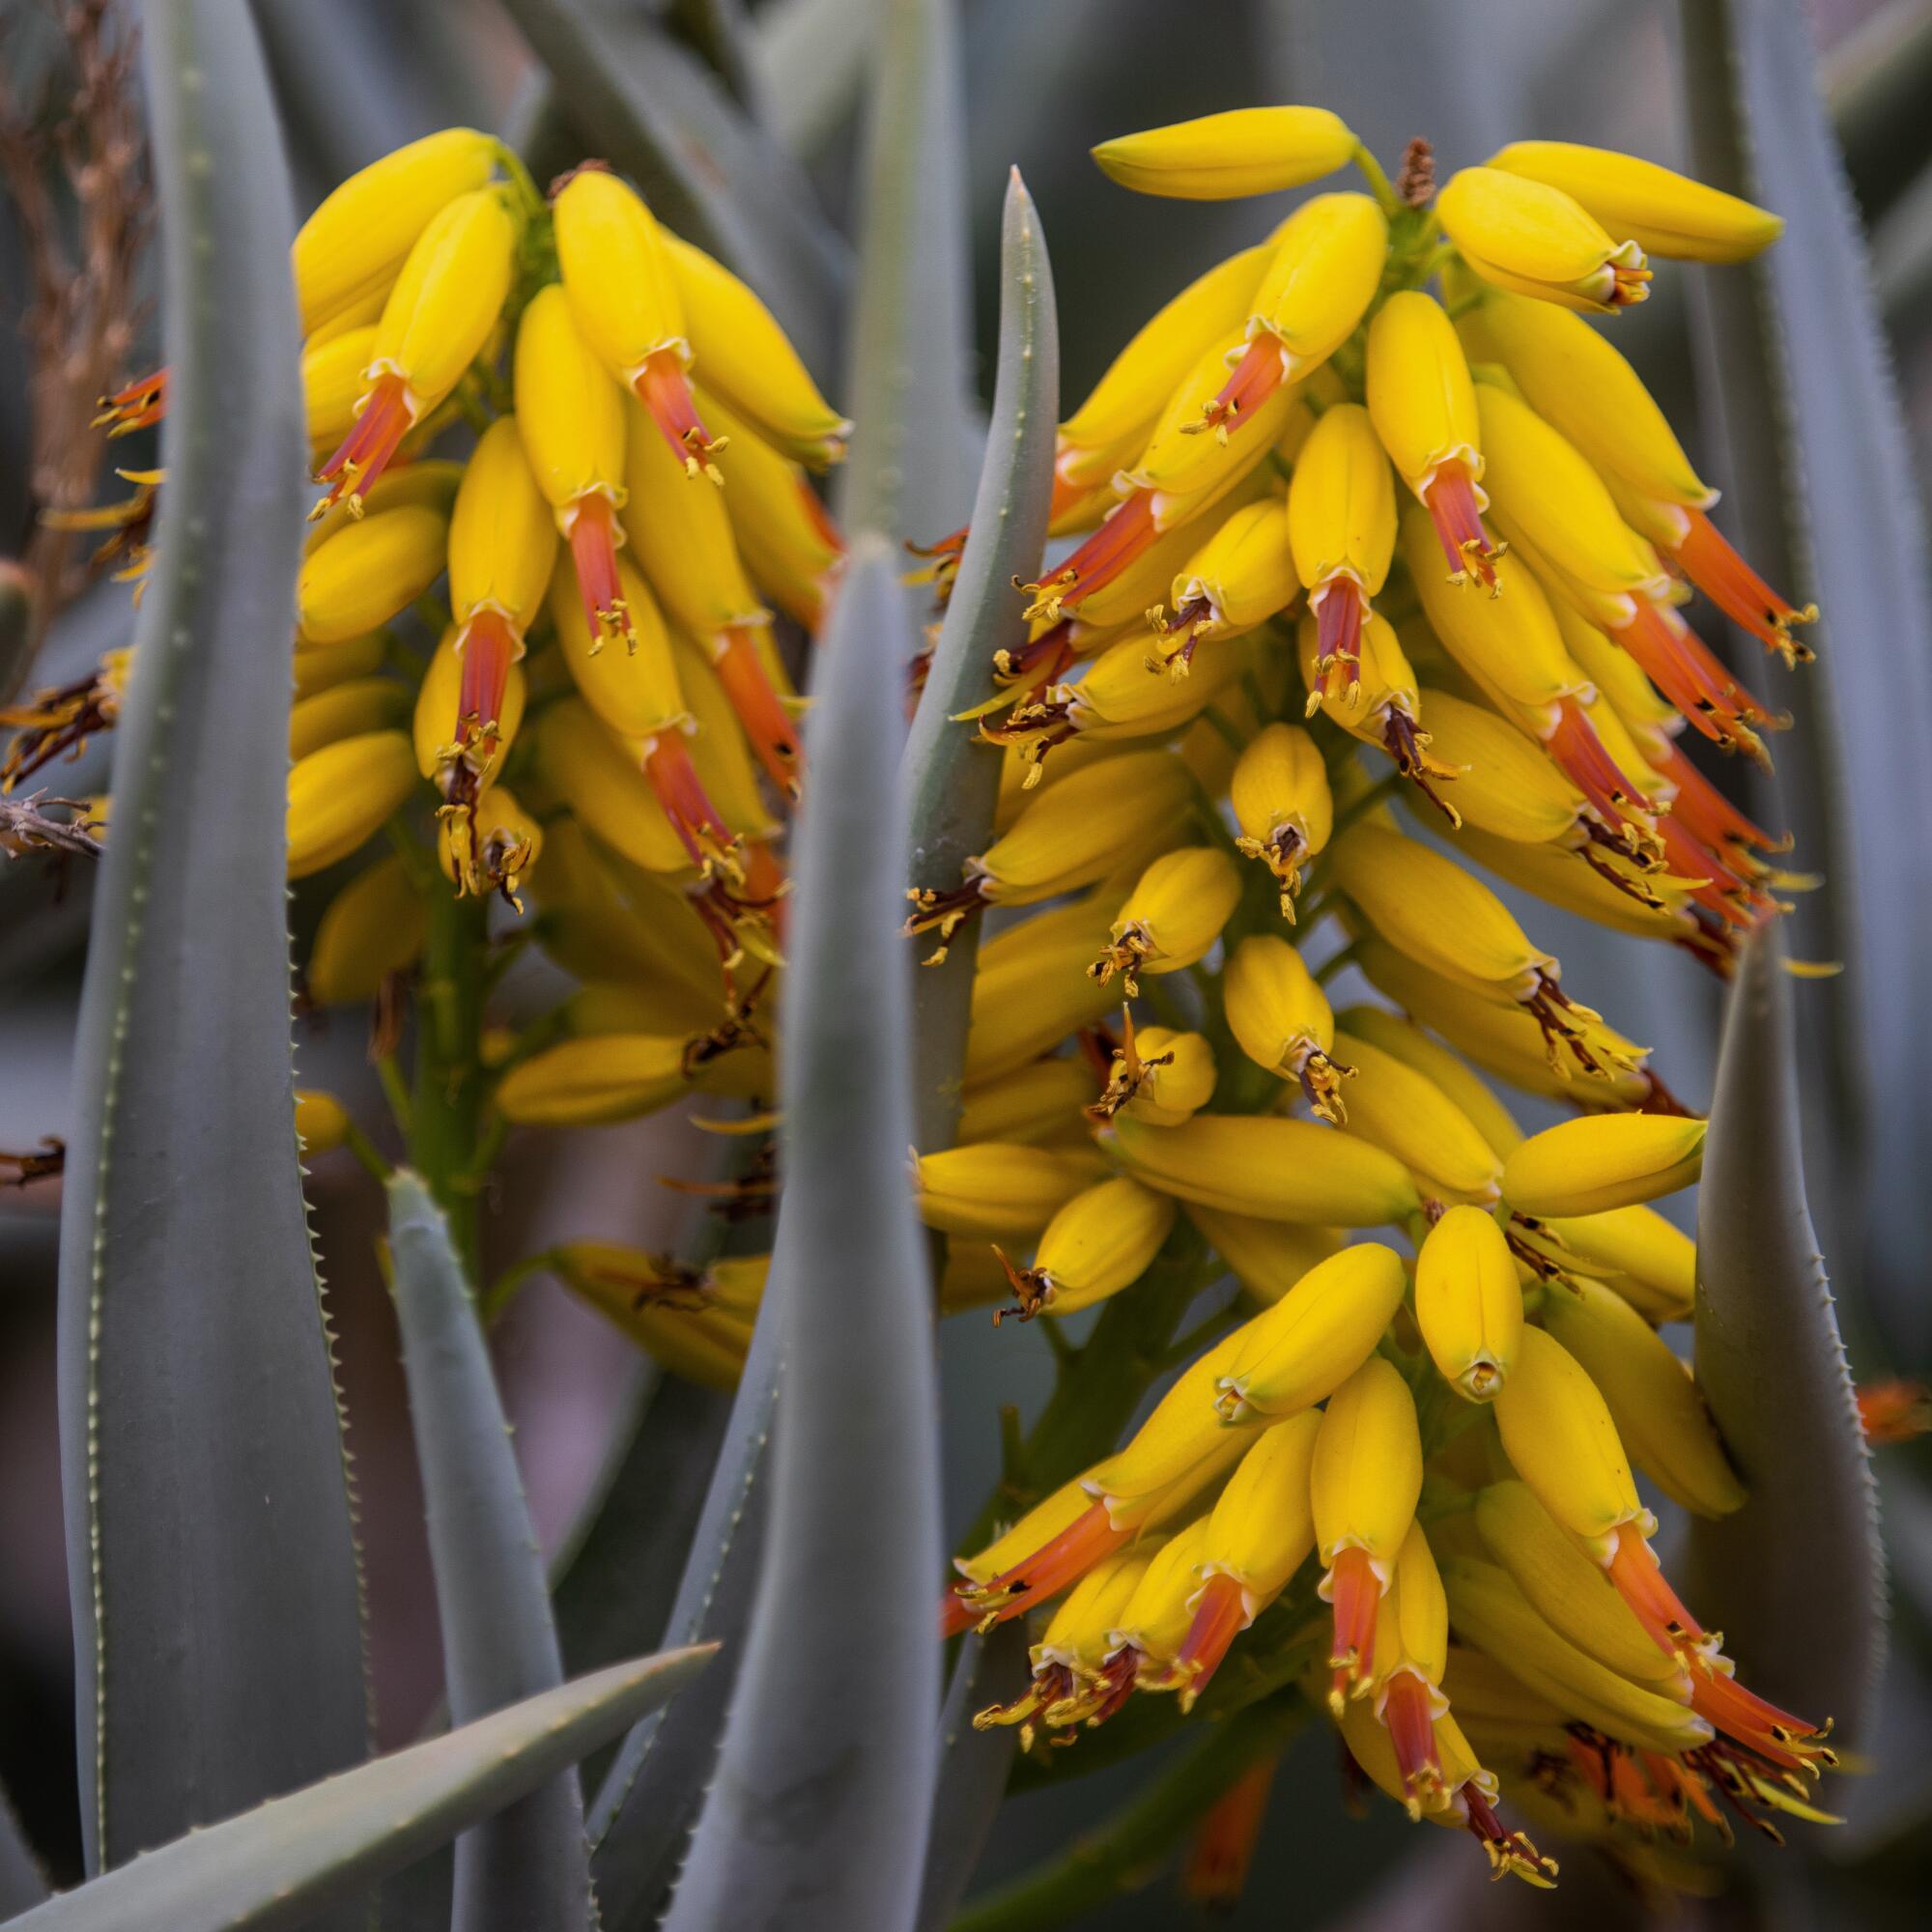 Yellow clusters of a succulent's flowers among its gray spiky leaves